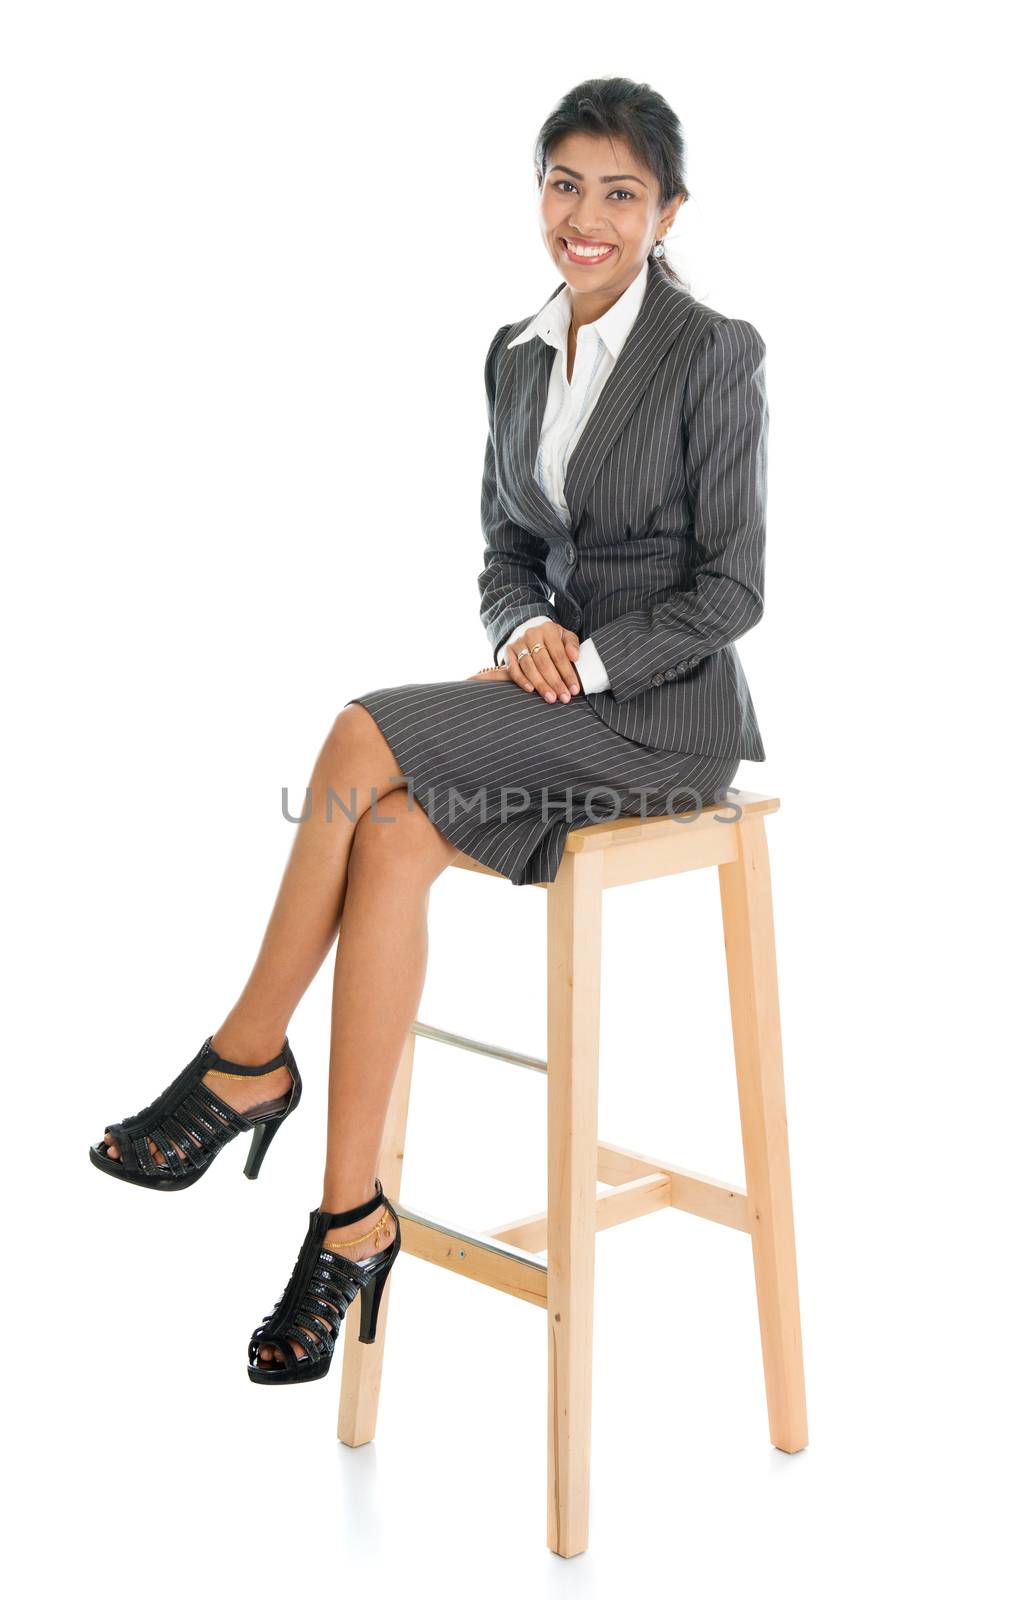 Full length black businesswoman sitting on high chair and smiling, isolated on white background.